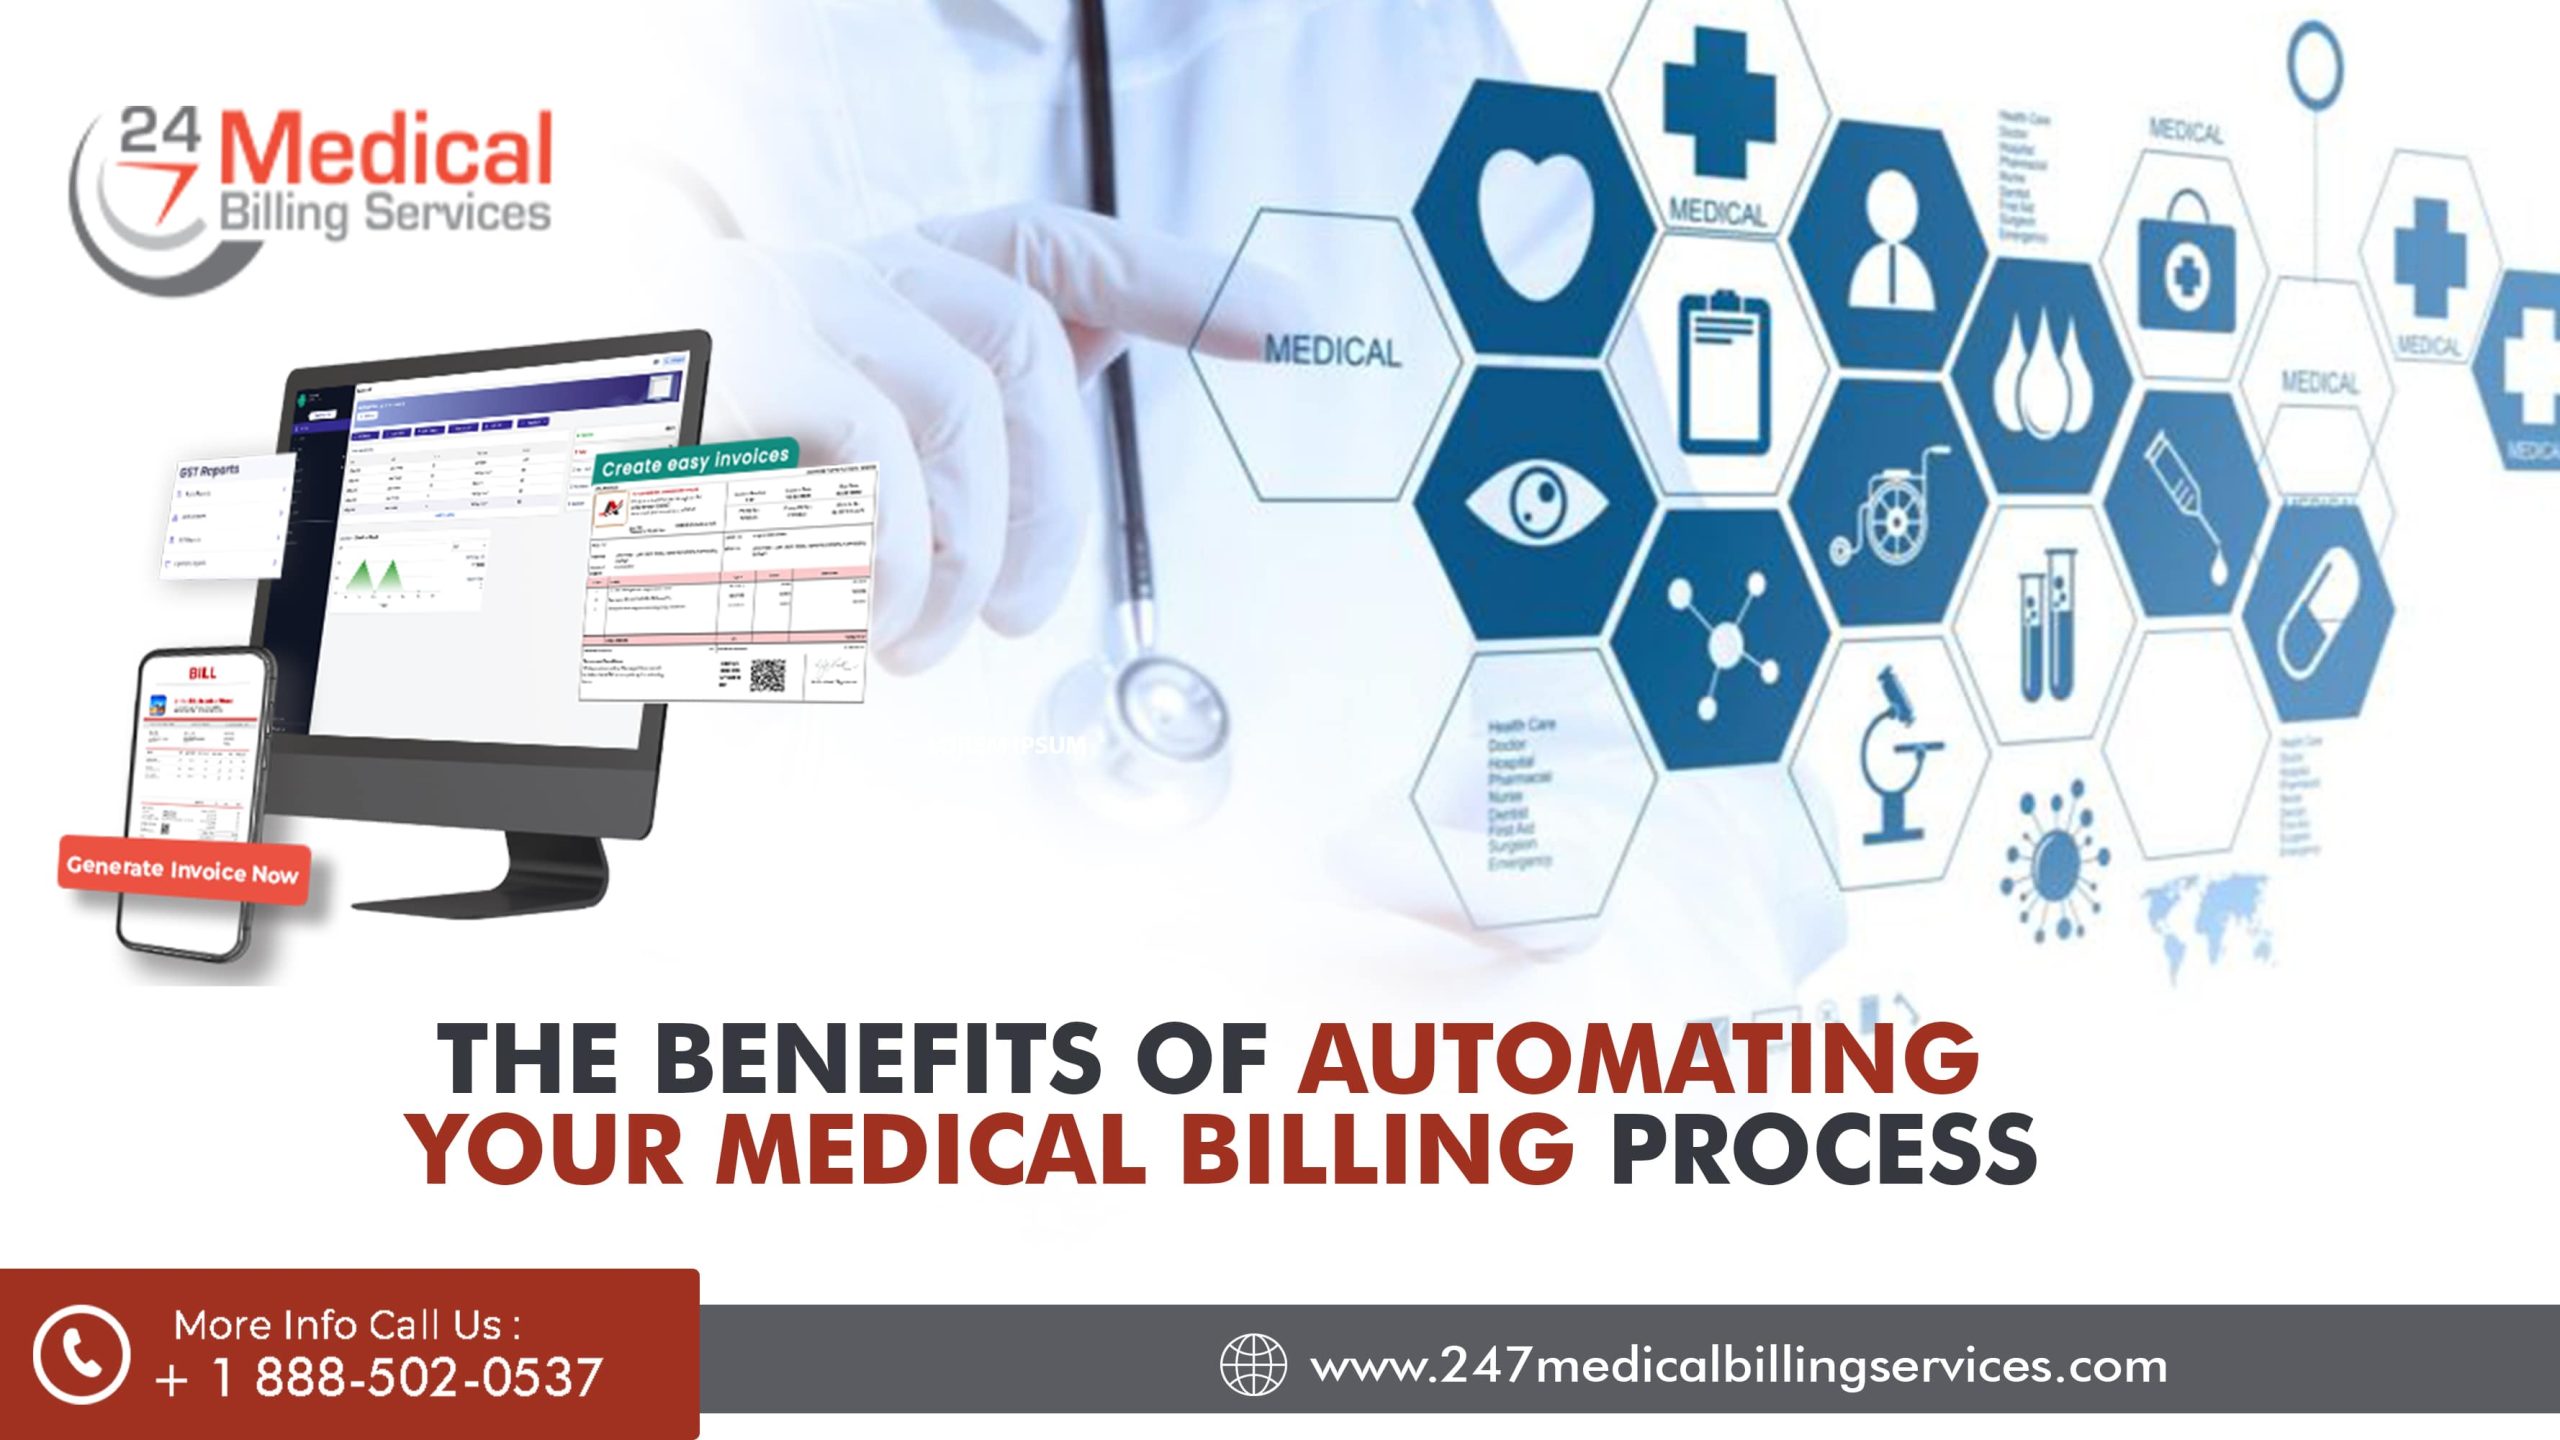  The Benefits of Automating Your Medical Billing Process